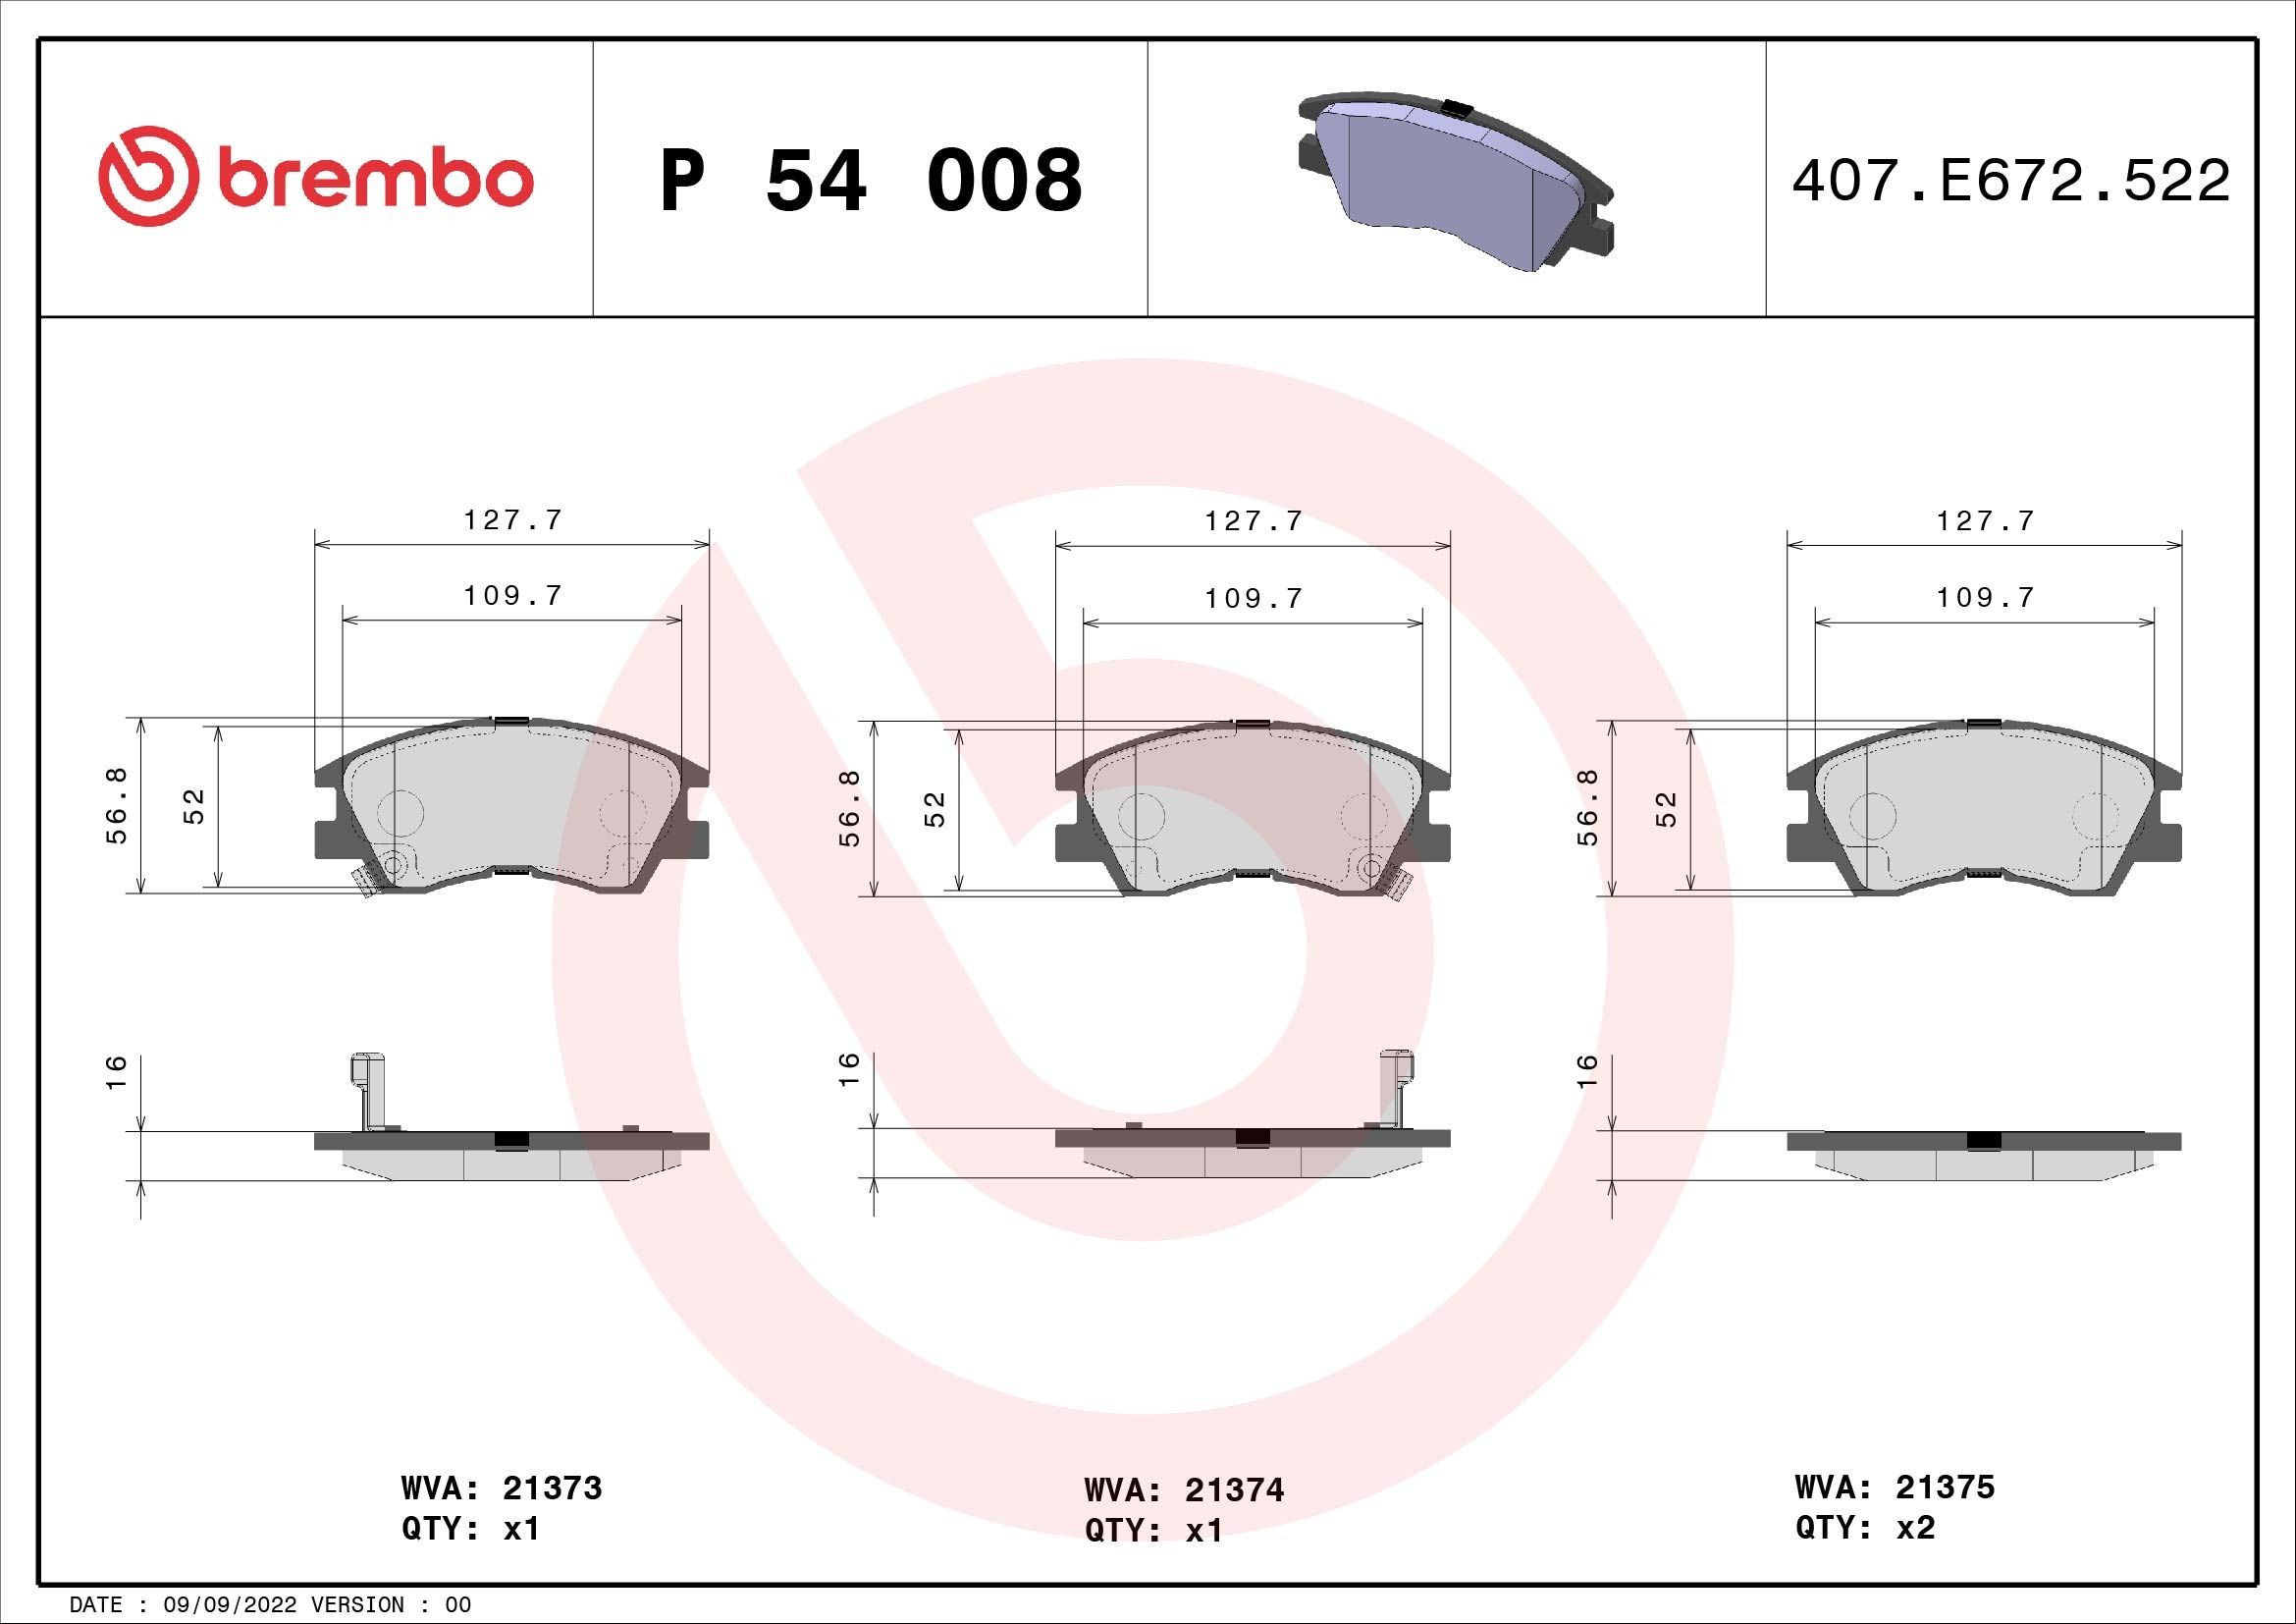 BREMBO P 54 008 Brake pad set with acoustic wear warning, without accessories